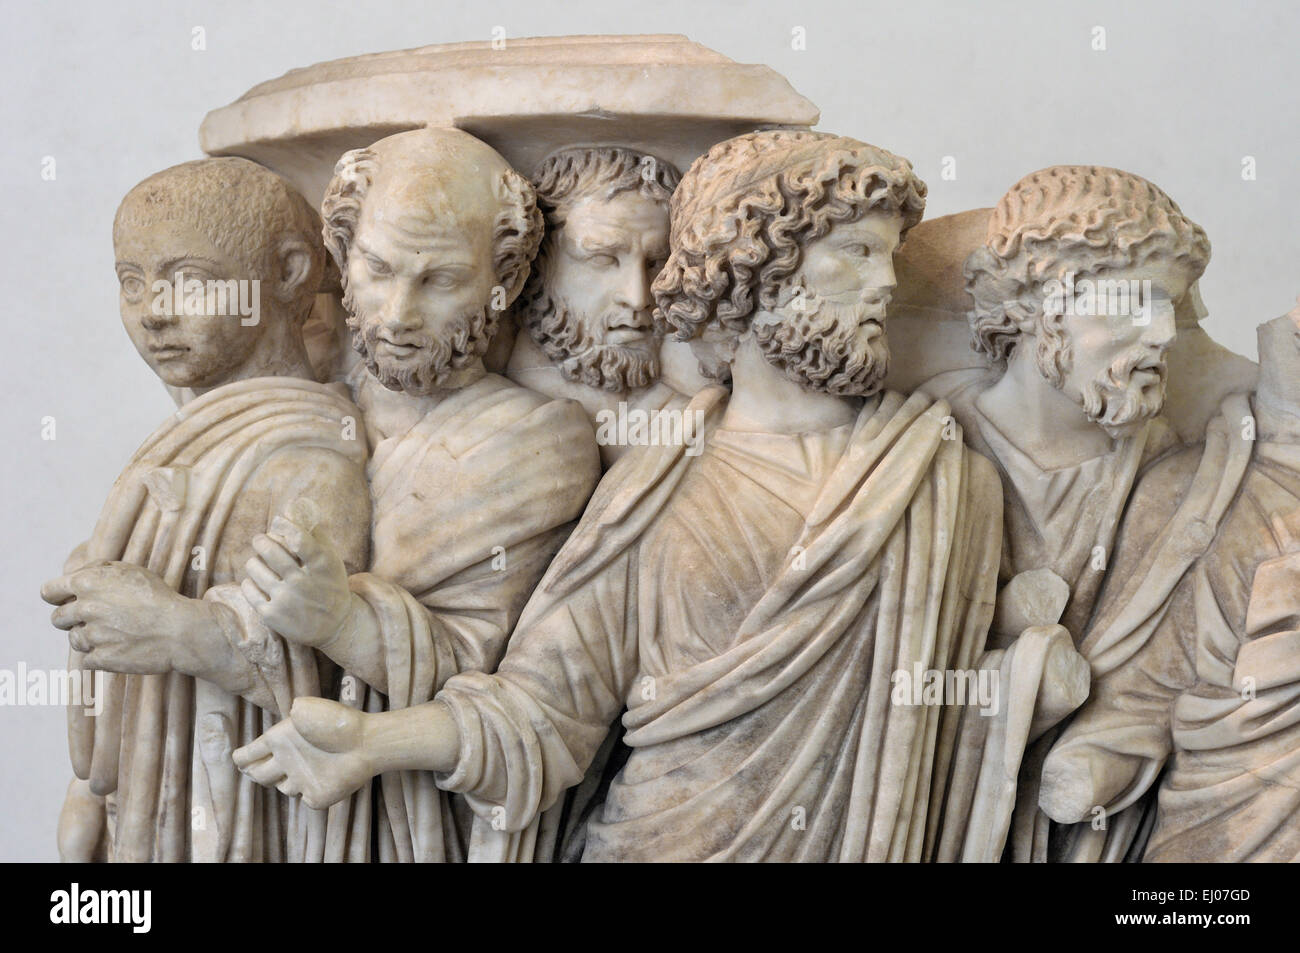 Sarcophagus with processus consularis (a procession for the appointment of a consul) Museo Nazionale Romano Palazzo Massimo Stock Photo